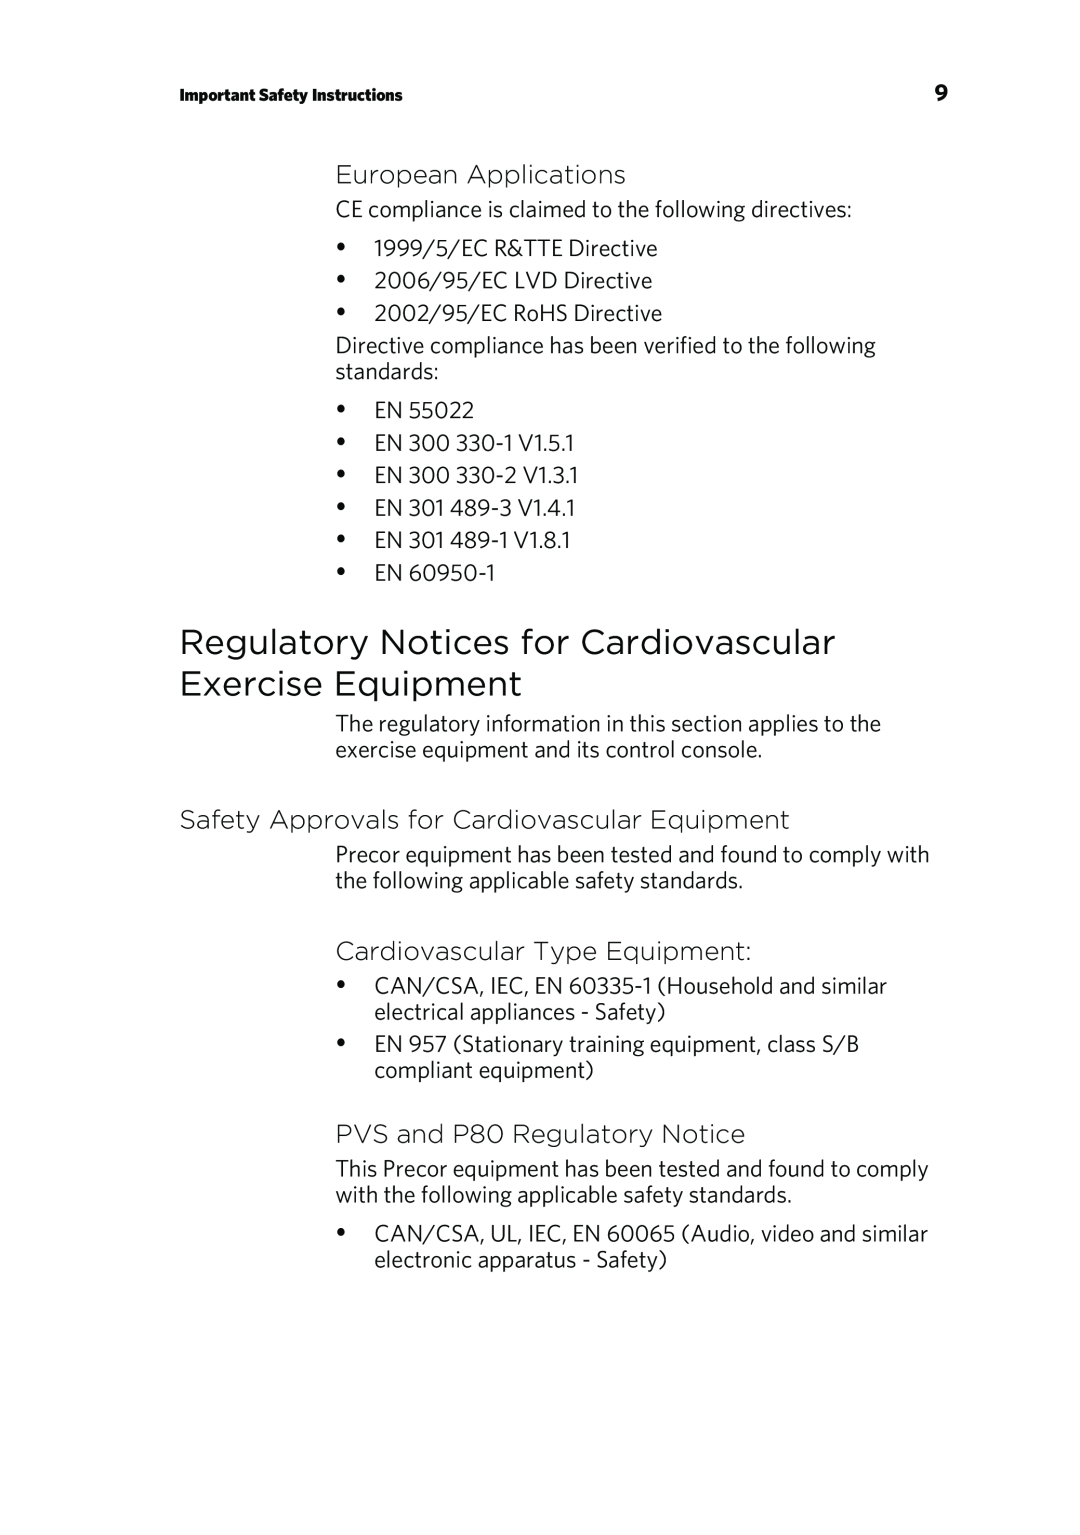 Precor P80 manual European Applications, Safety Approvals for Cardiovascular Equipment, Cardiovascular Type Equipment 